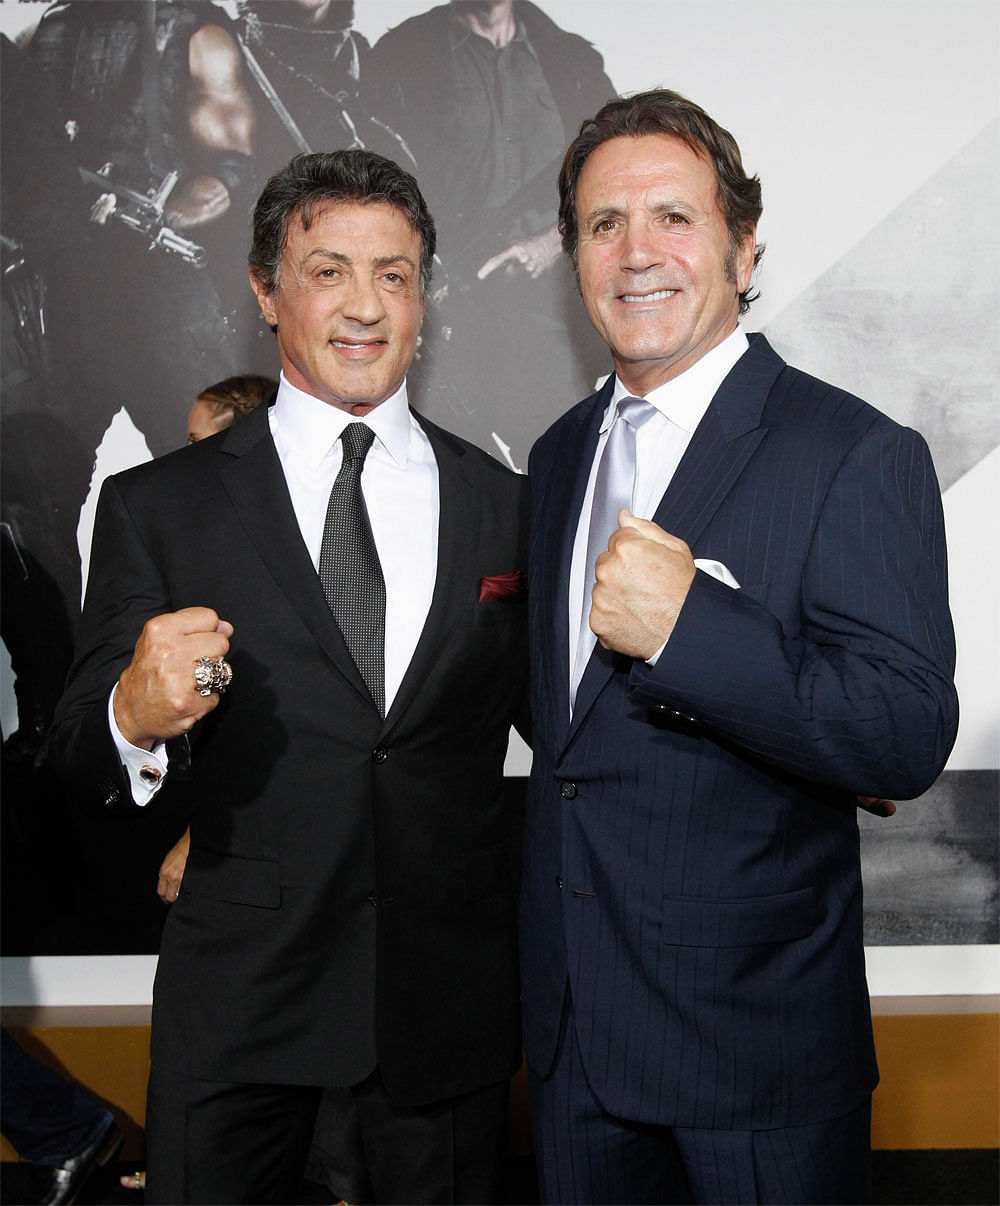 Cast member Sylvester Stallone (L) poses with his brother Frank at the premiere of 'The Expendables 2' at the Grauman's Chinese theatre in Hollywood, California August 15, 2012. The movie opens in the U.S. on August 17. REUTERS